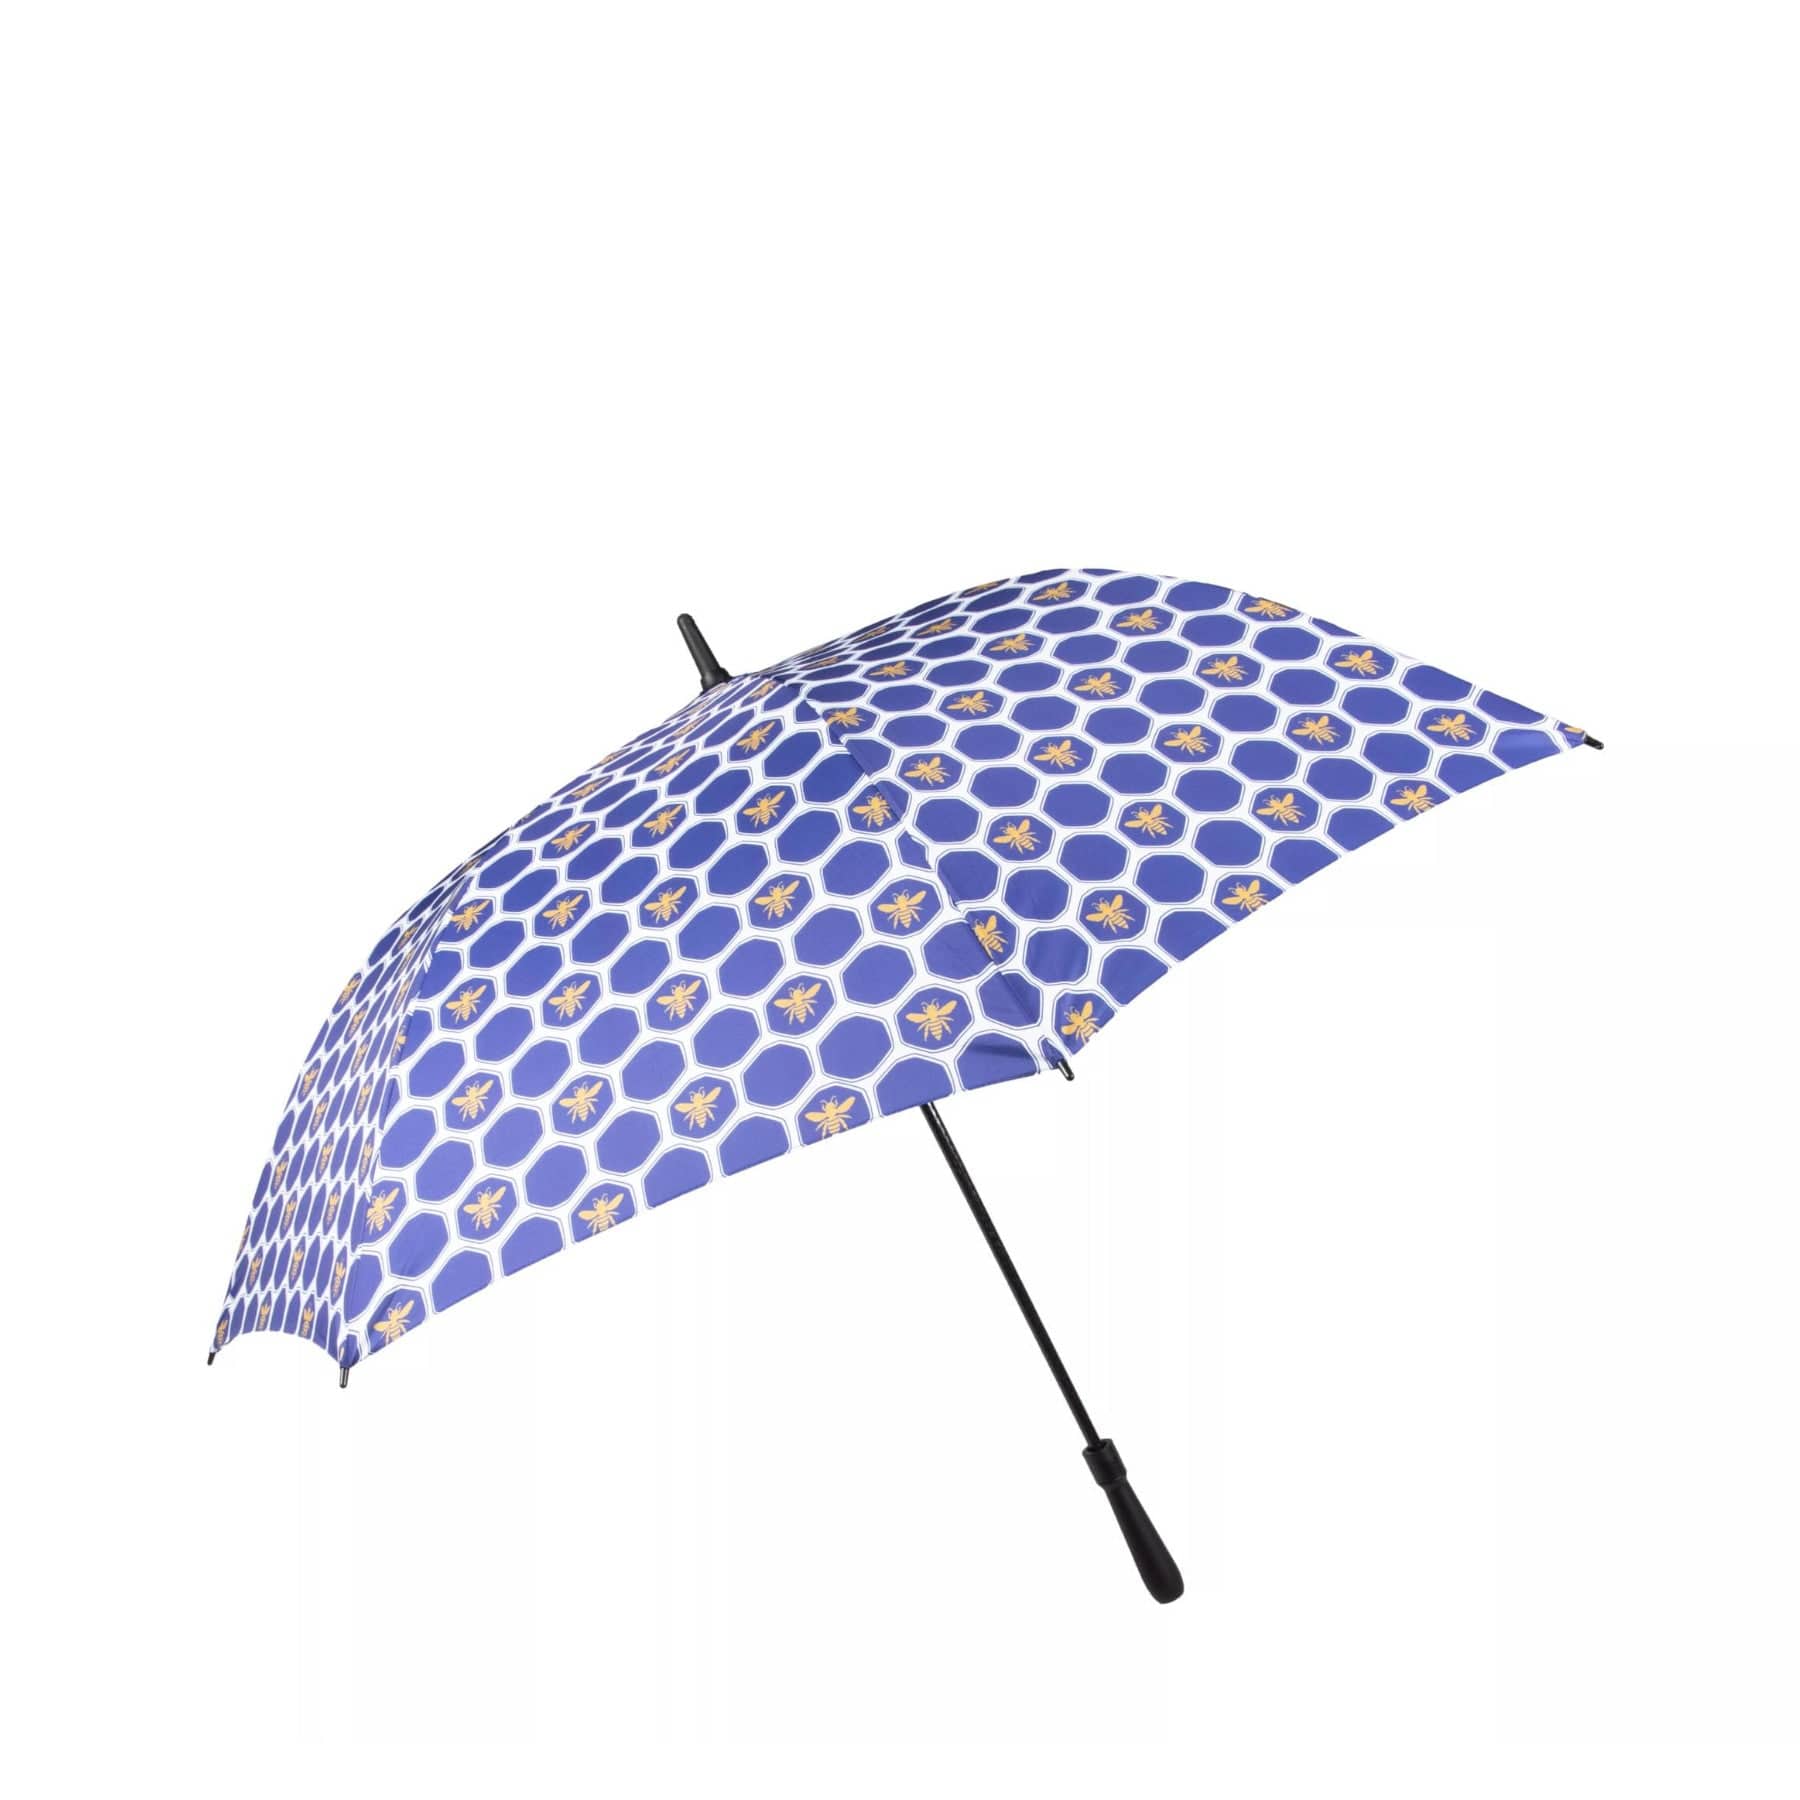 Blue and yellow patterned open umbrella isolated on white background.